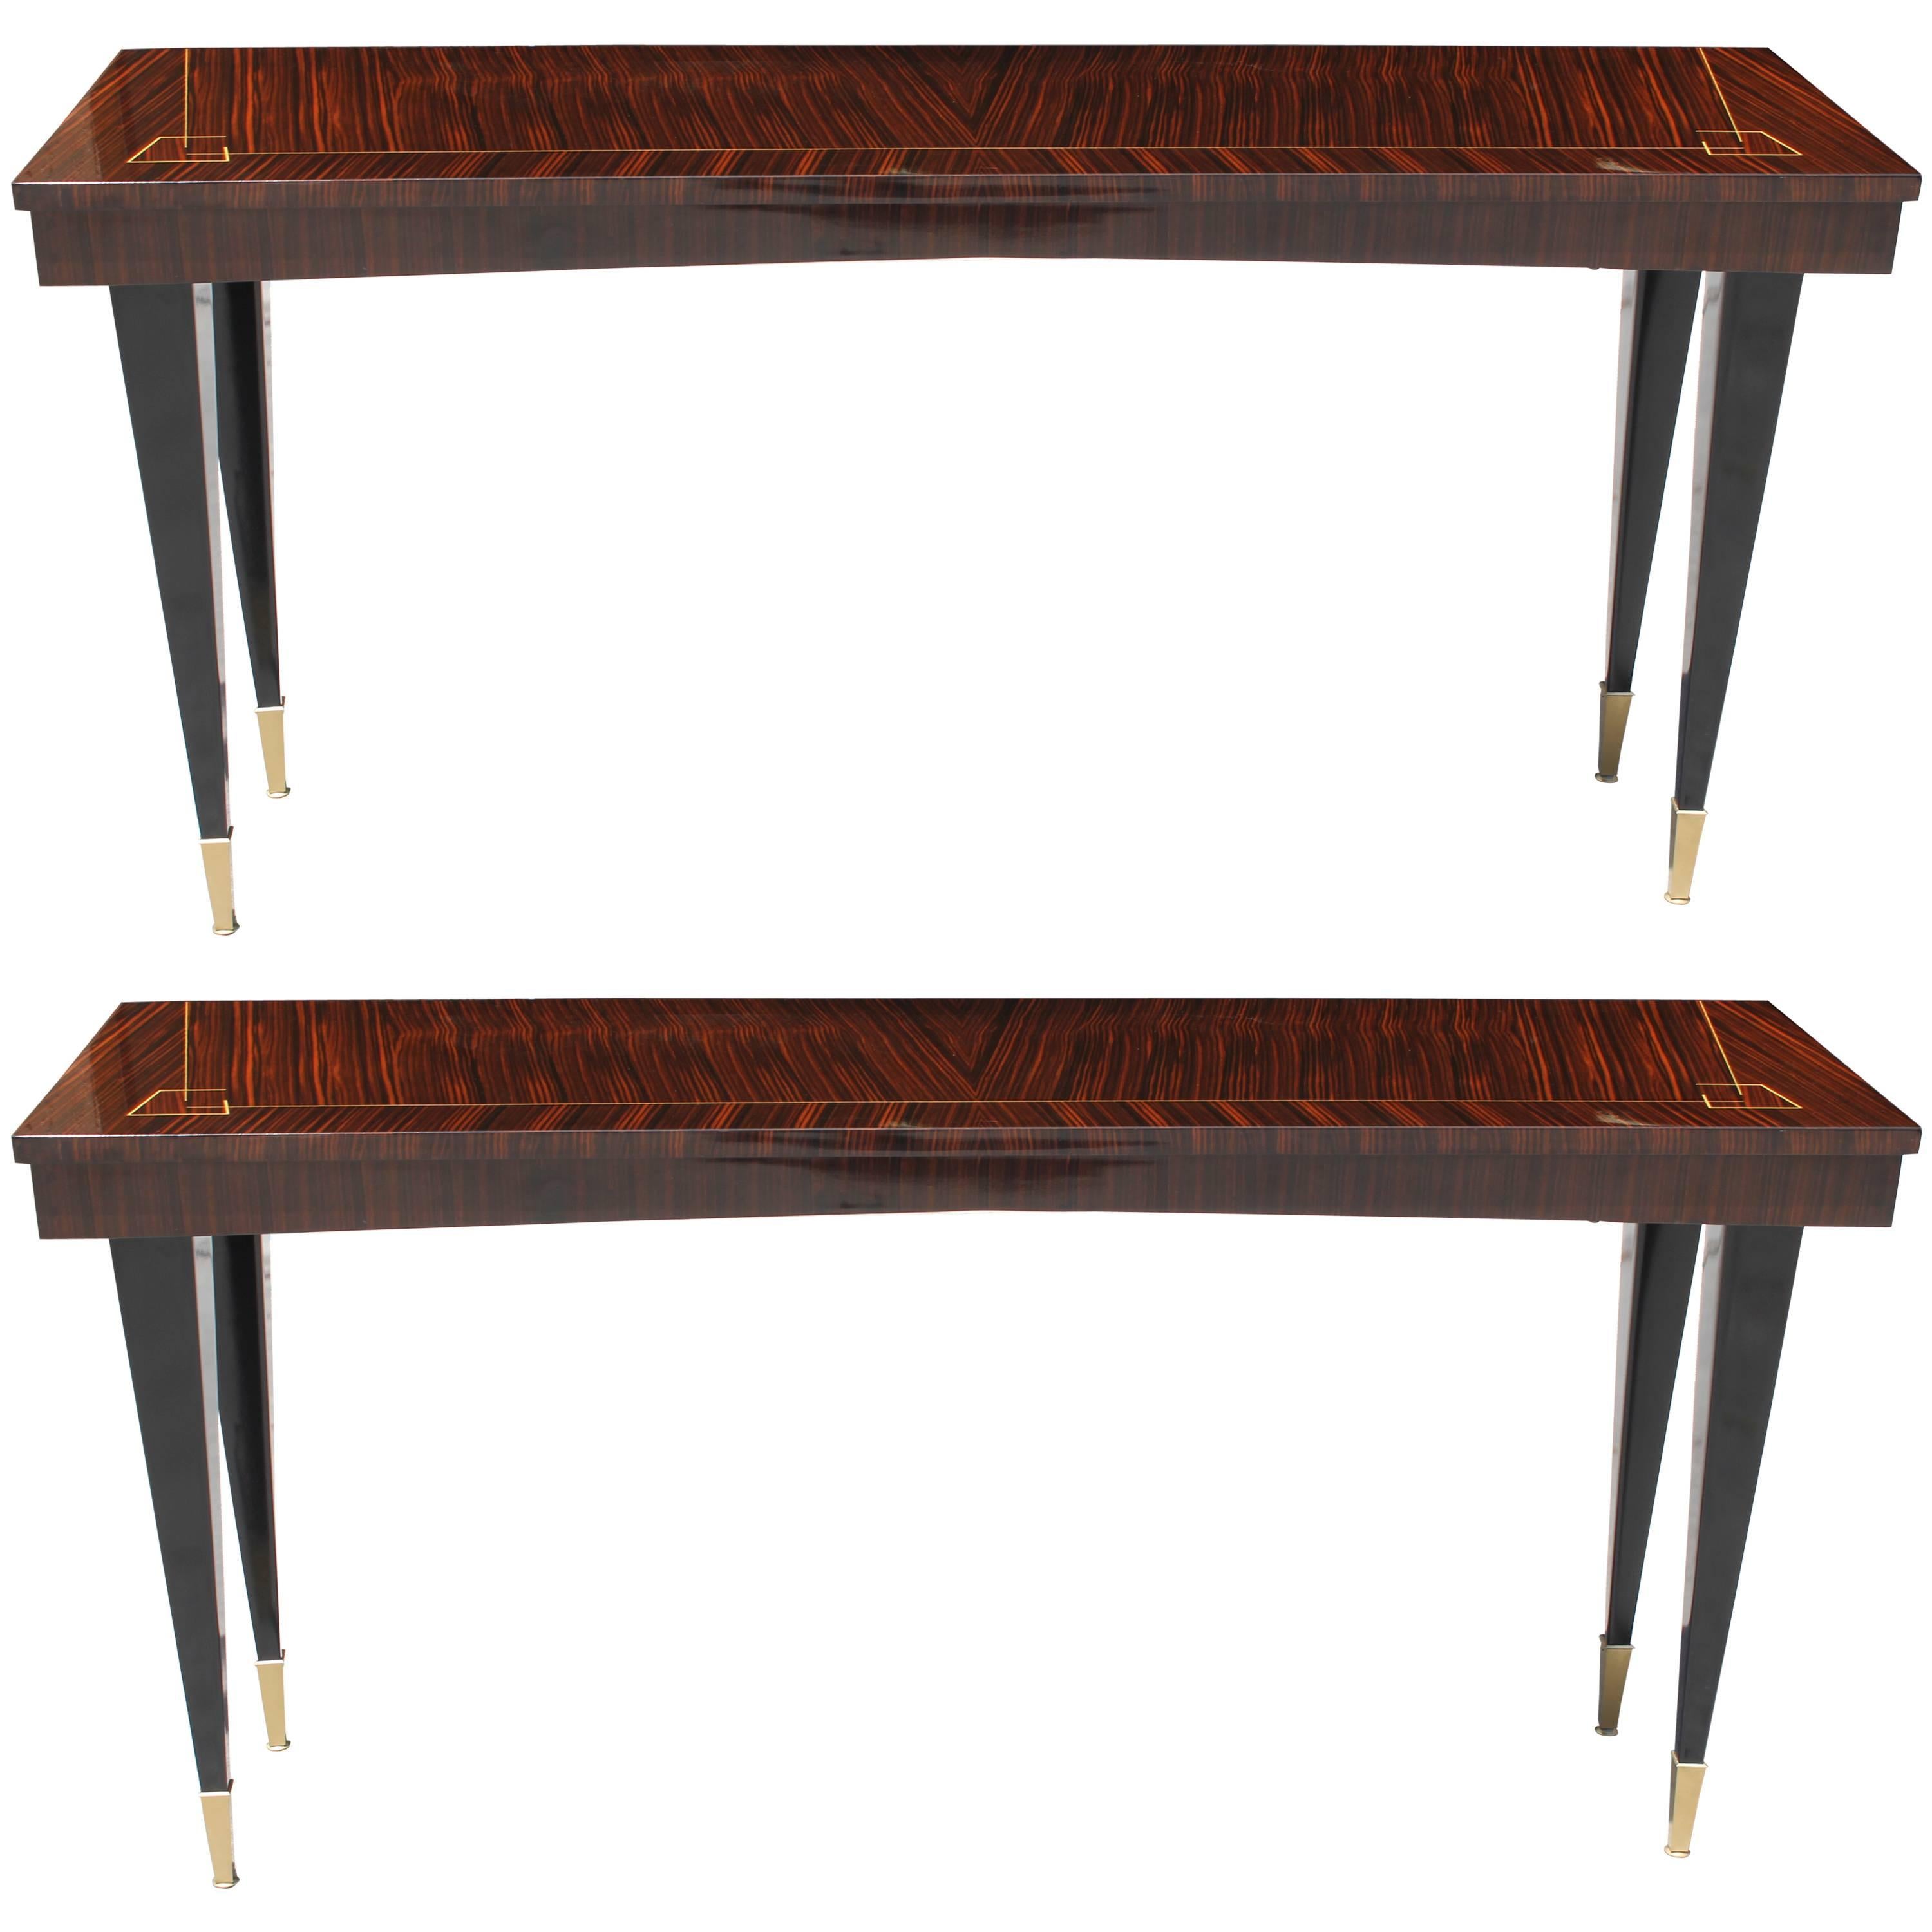 Pair of French Art Deco Long Exotic Macassar Ebony Console Tables, circa 1940s